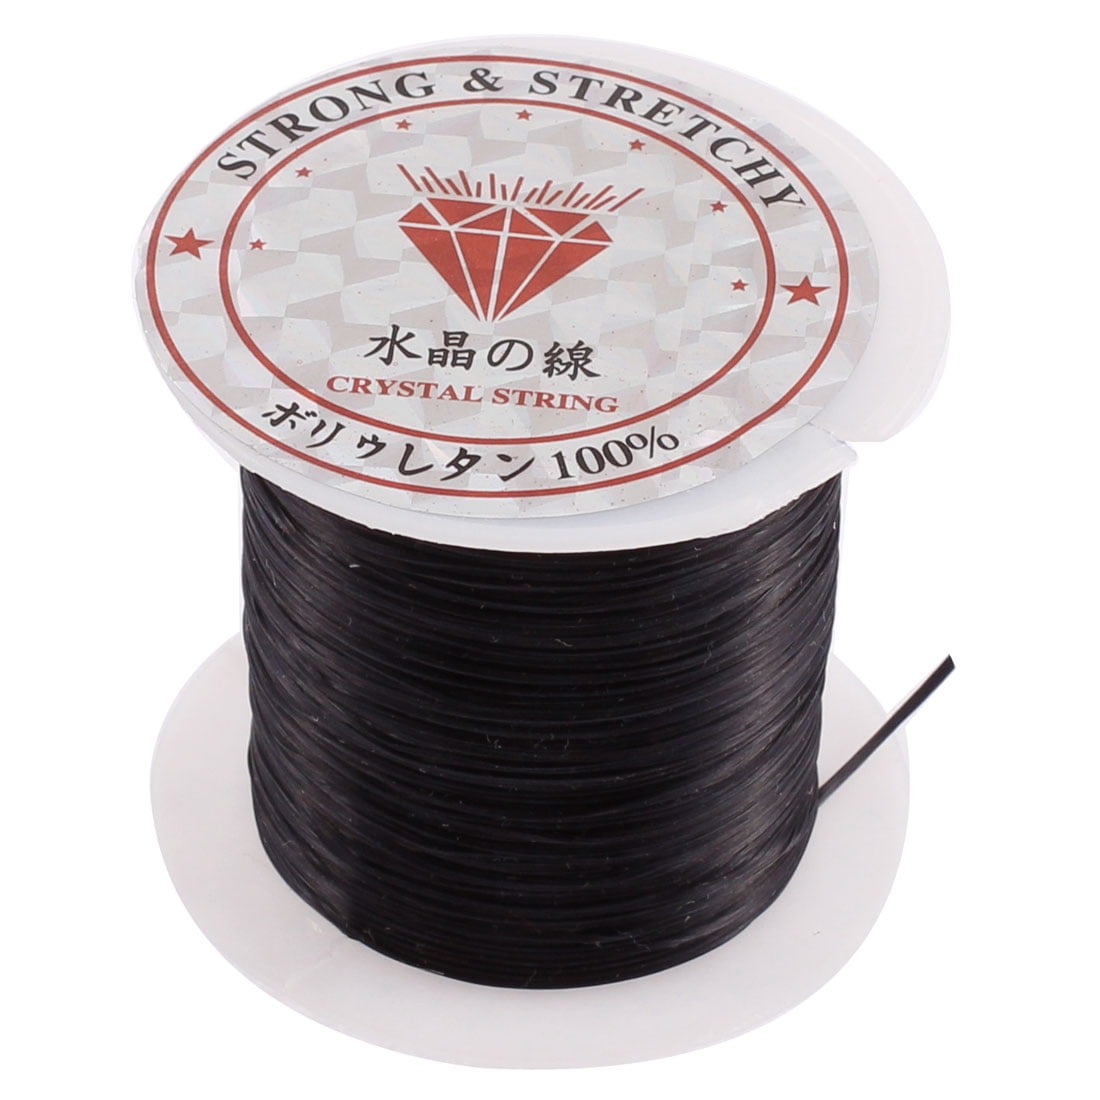 Stretchy Elastic Beading Thread 2 x 0.5mm Clear 12 Metre Rolls For Stringing Necklaces And Bracelets